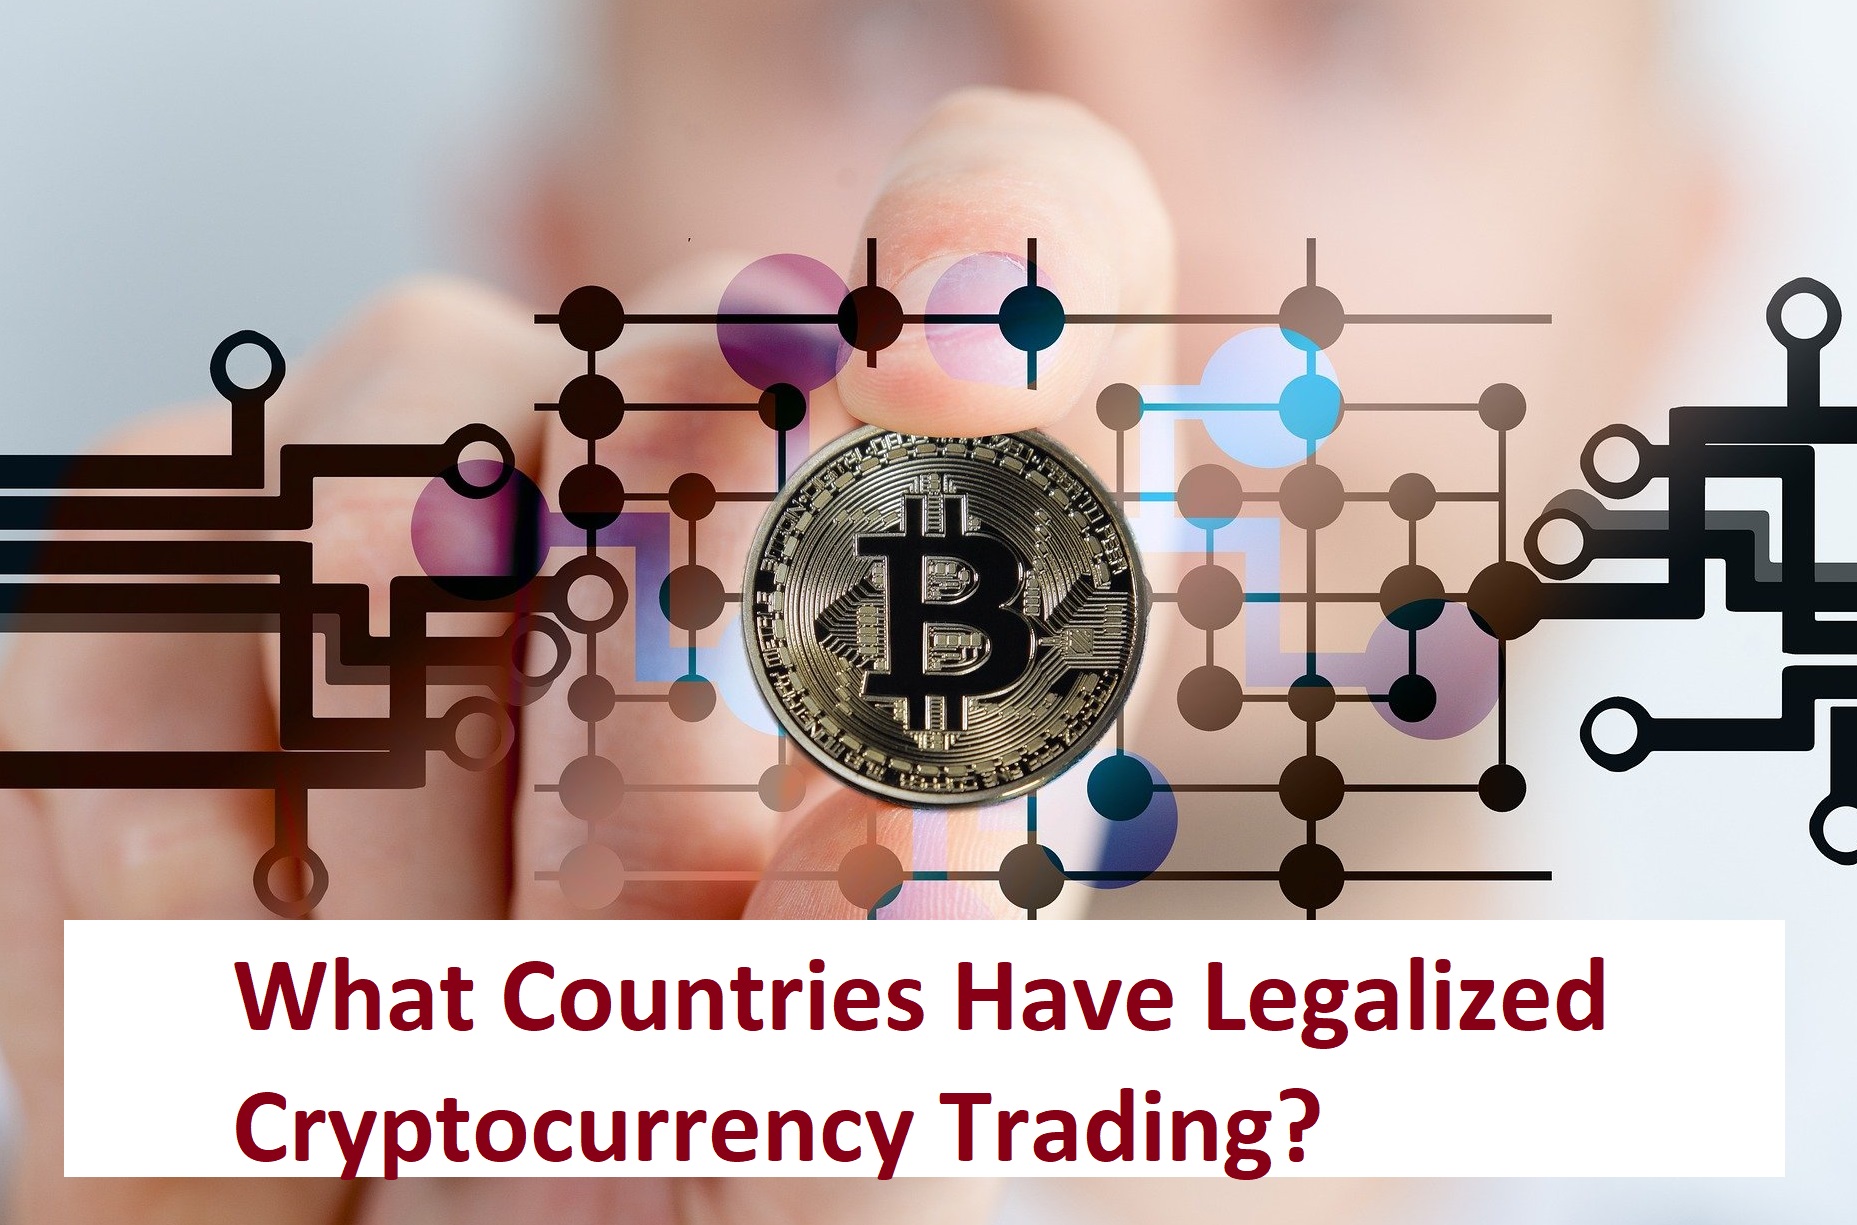 What Countries Have Legalized Cryptocurrency Trading?